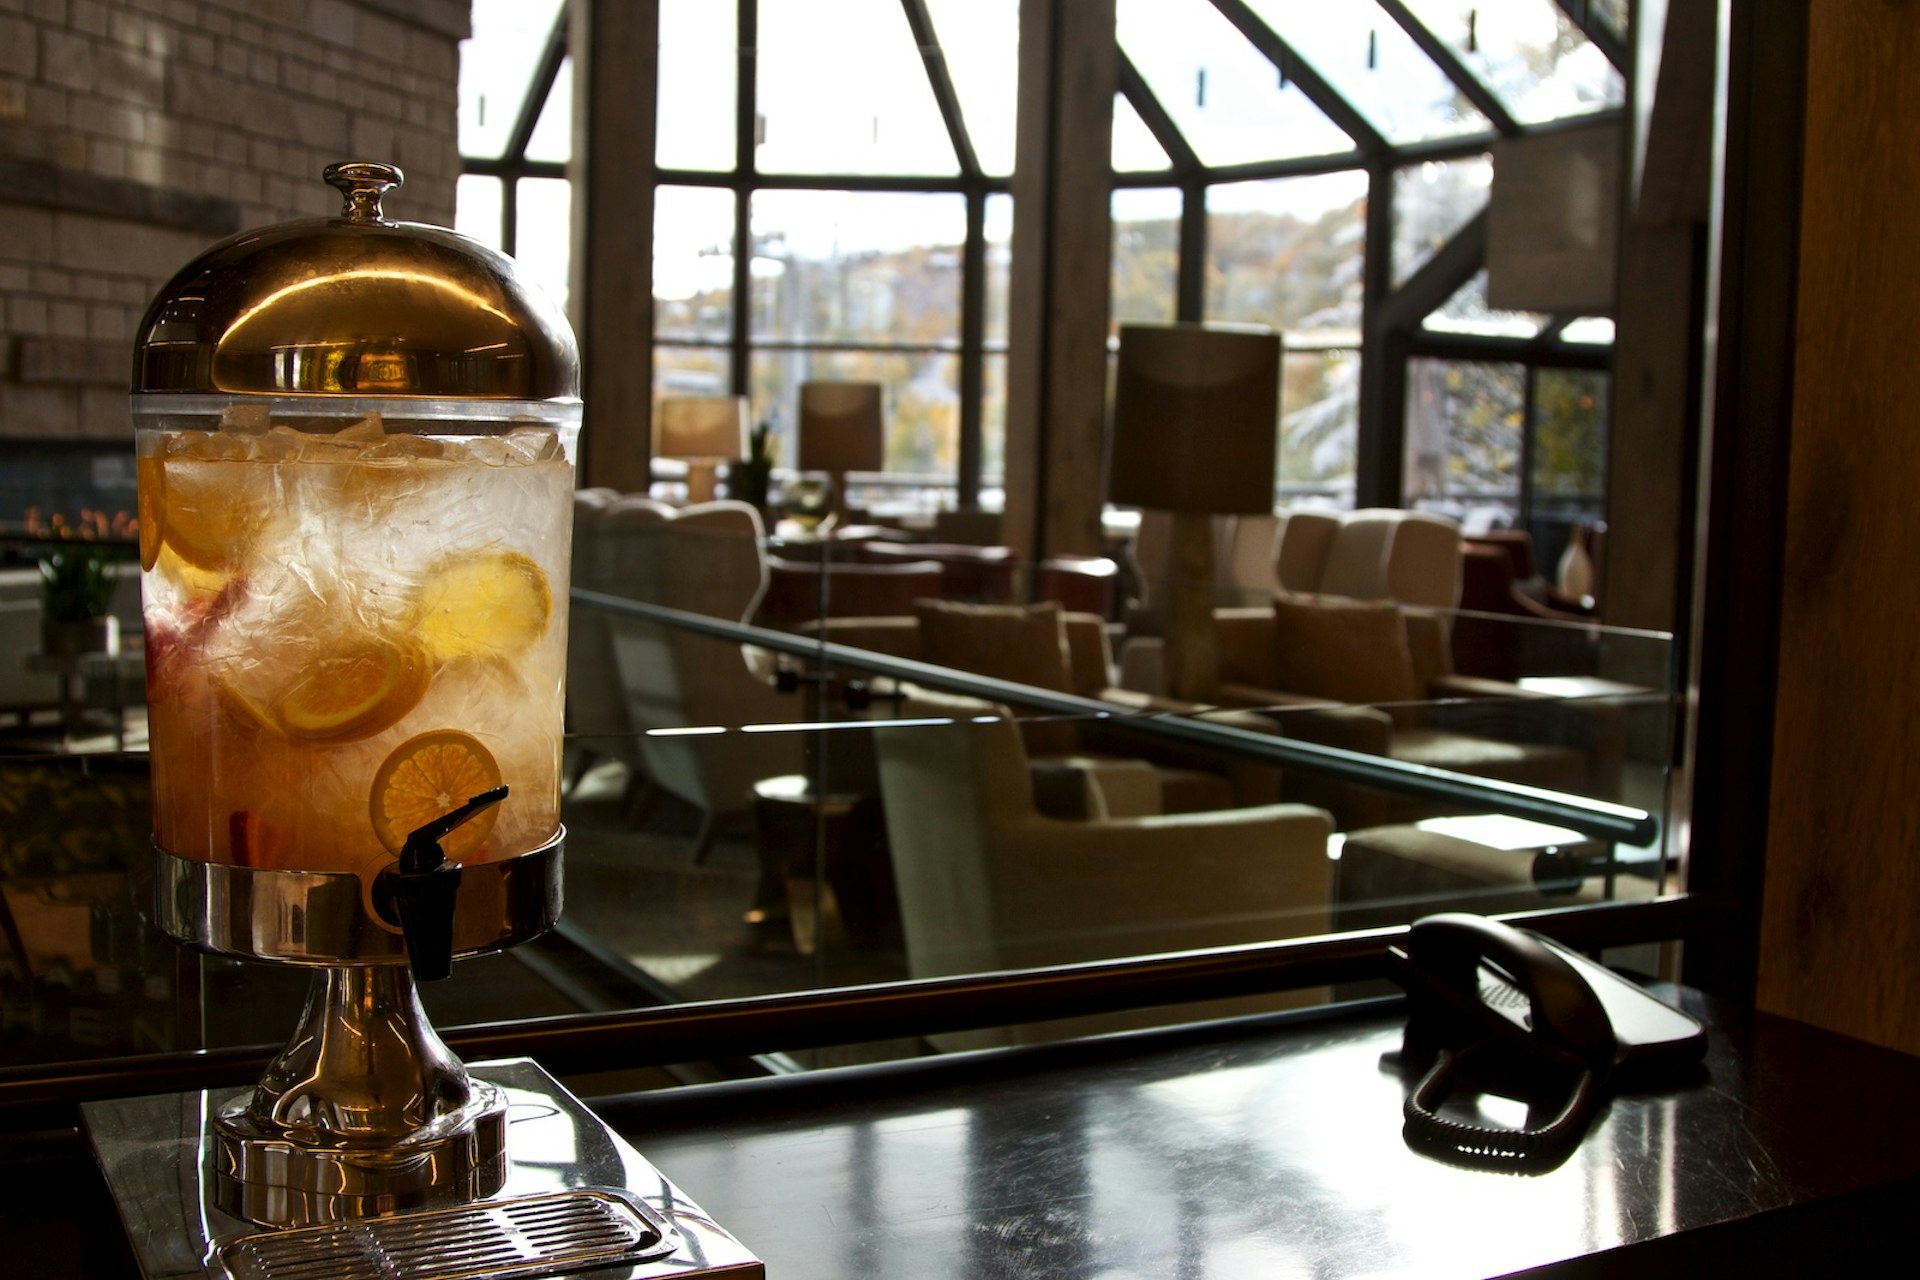 A large pitcher of lemon water on a hotel lobby bar